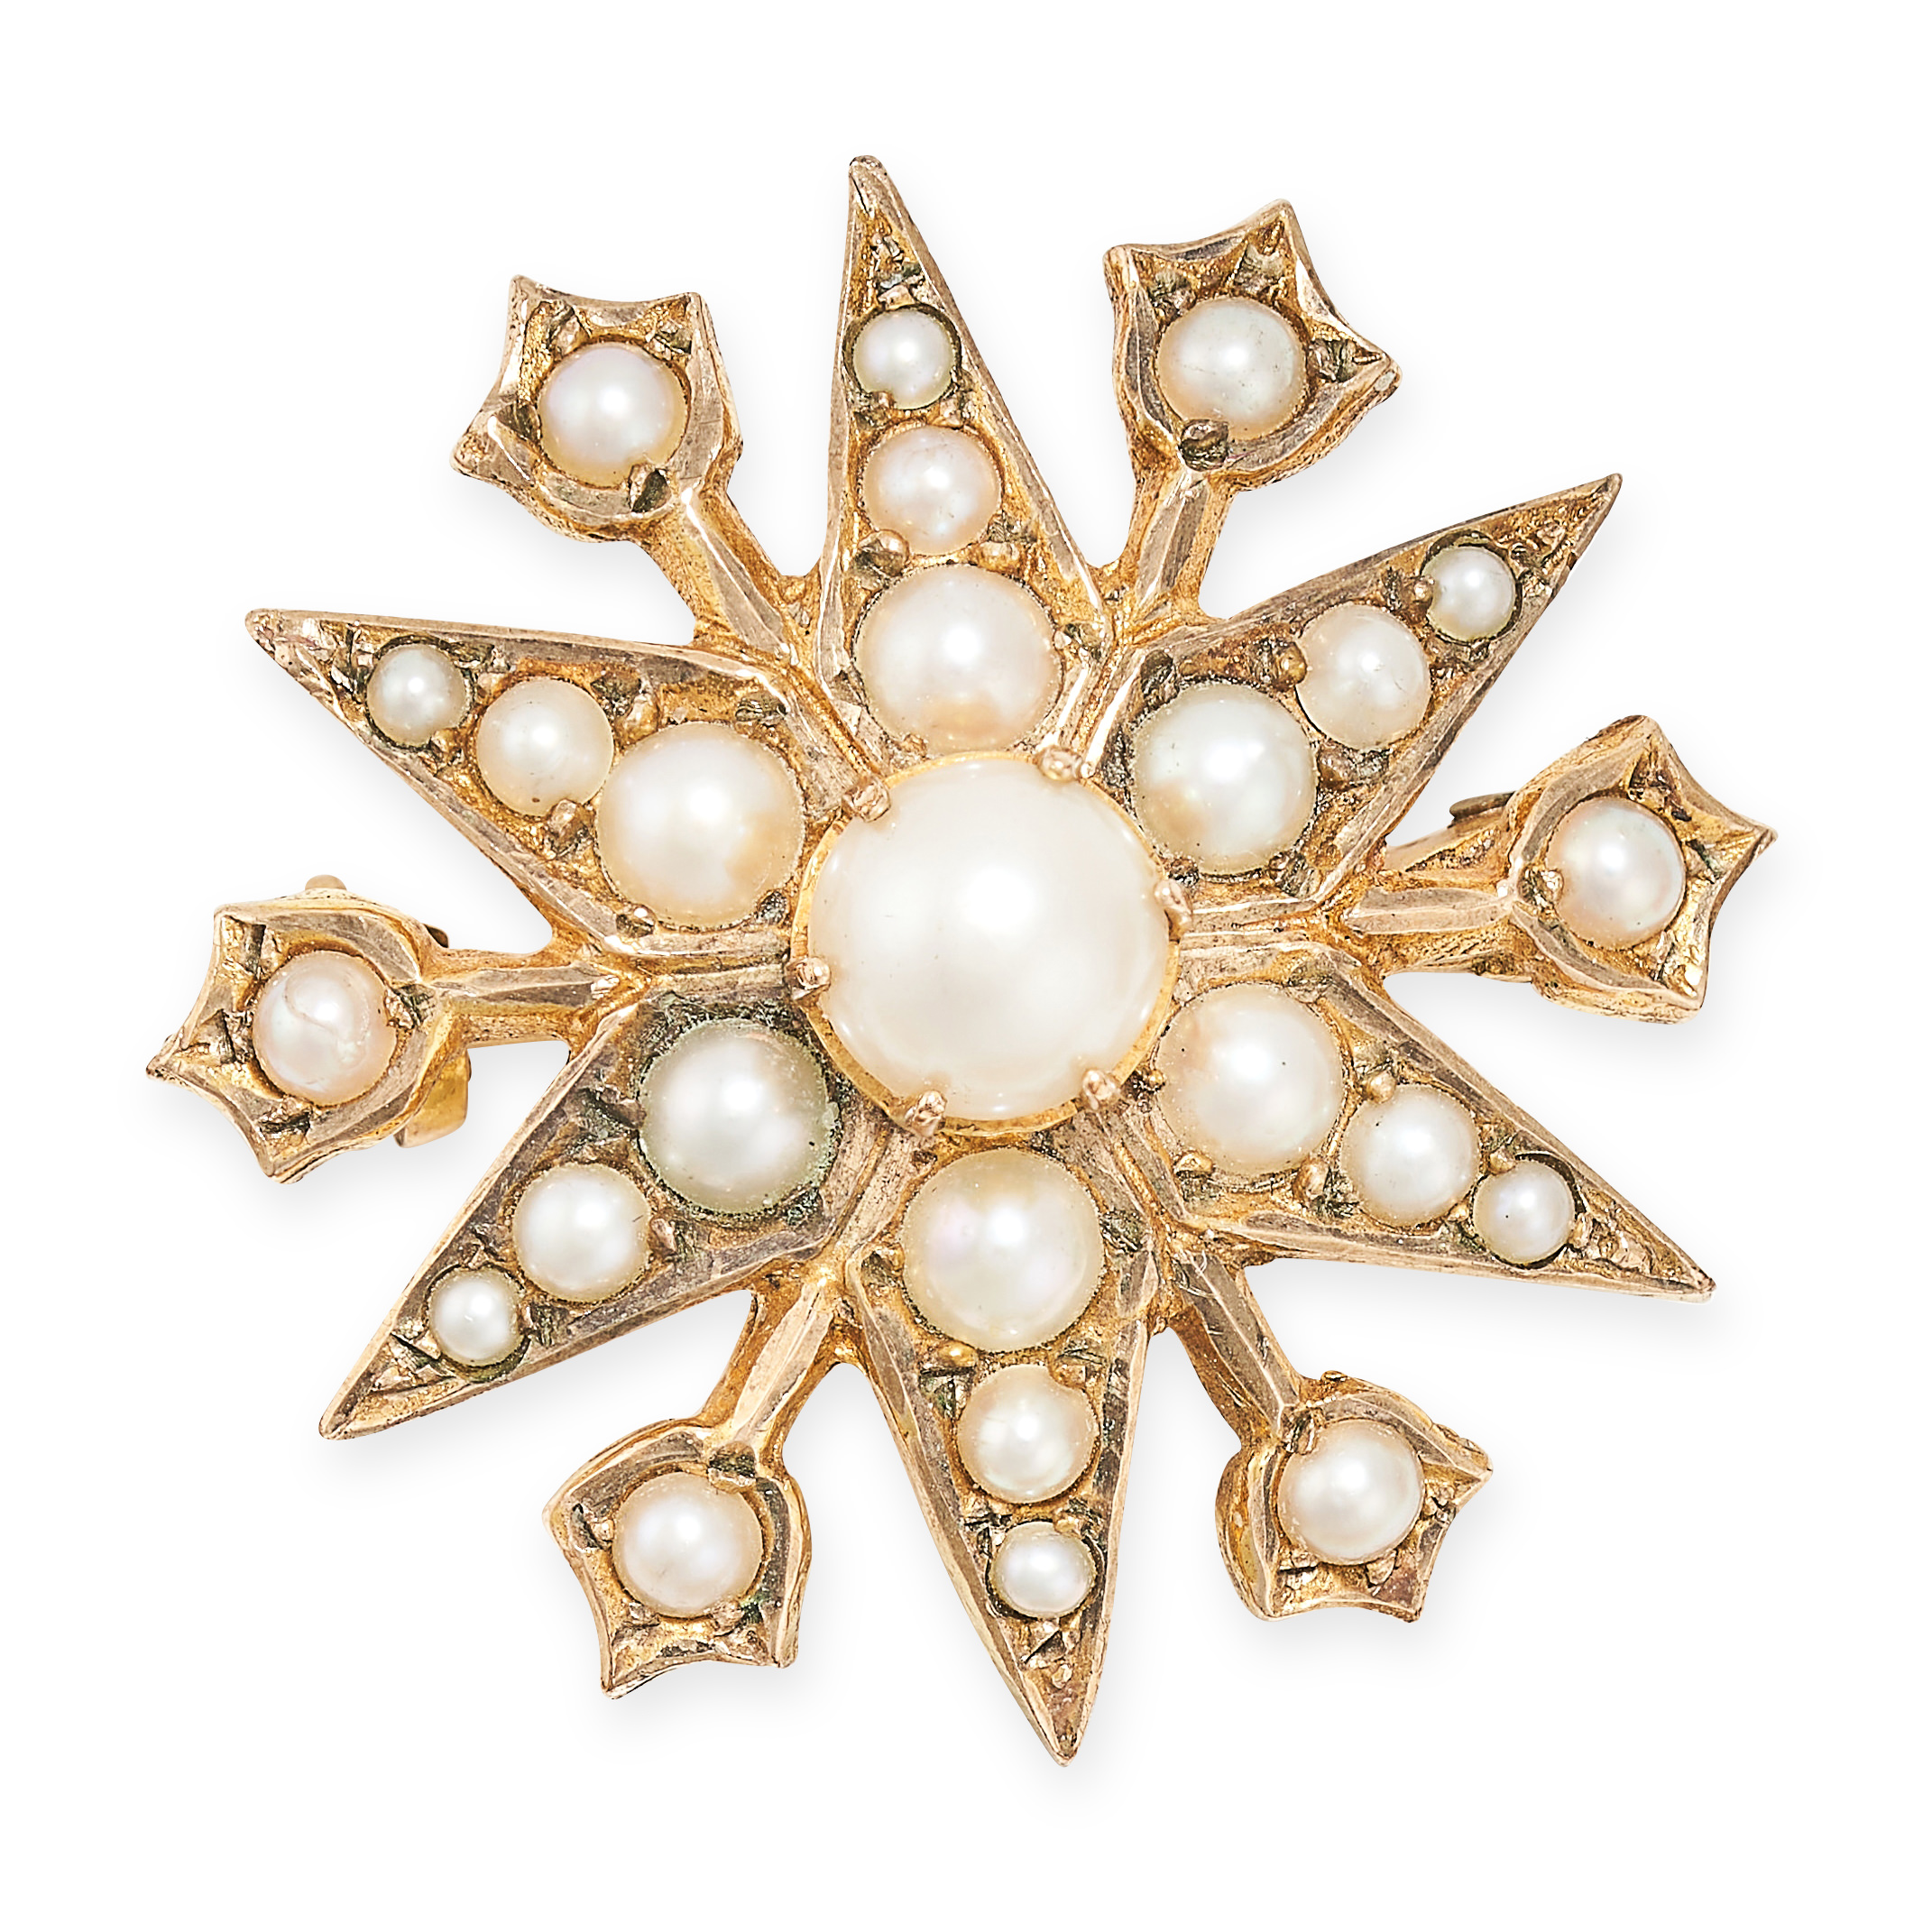 A VINTAGE PEARL STAR BROOCH in 9ct yellow gold, designed as a six rayed star, accented by foliate